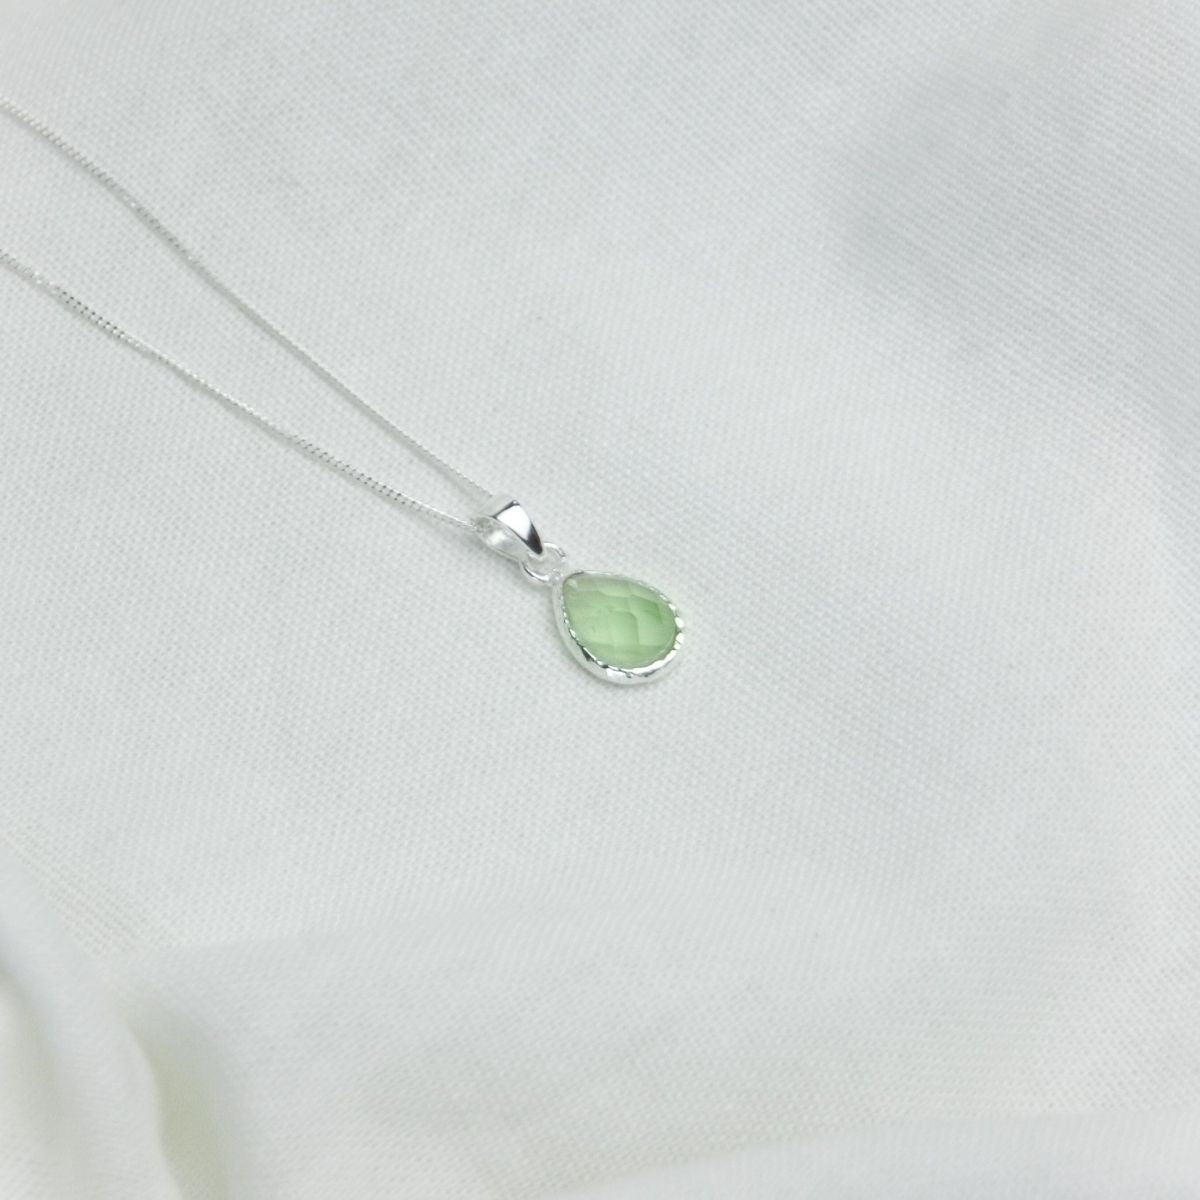 a pendant necklace on a white sheet